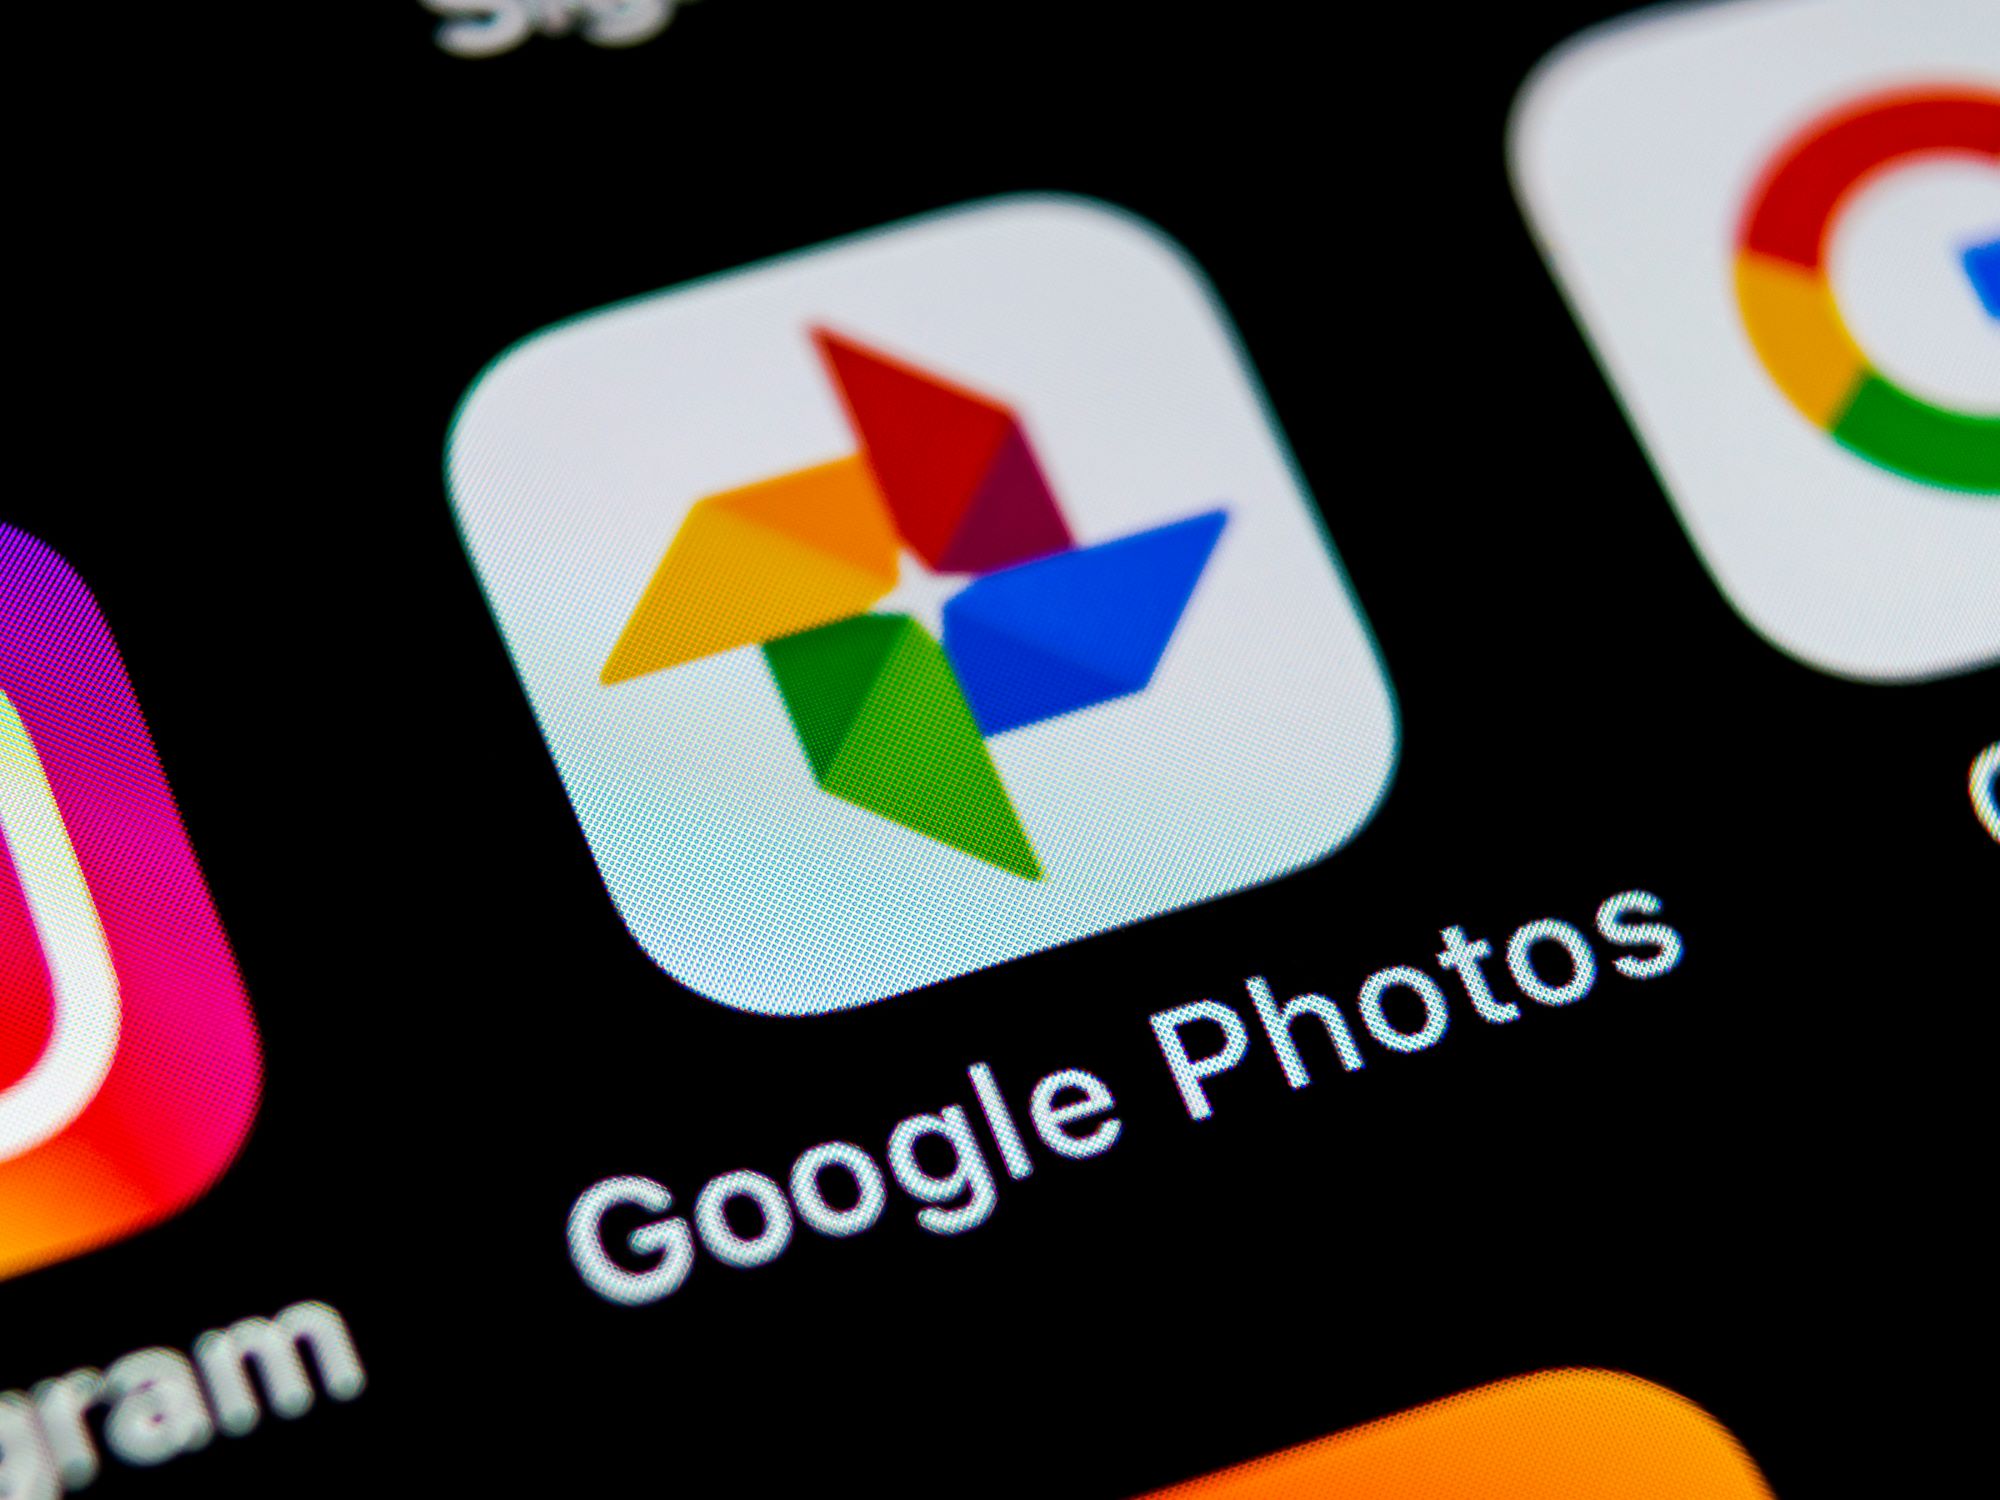 How To Add Background Music In Google Photos